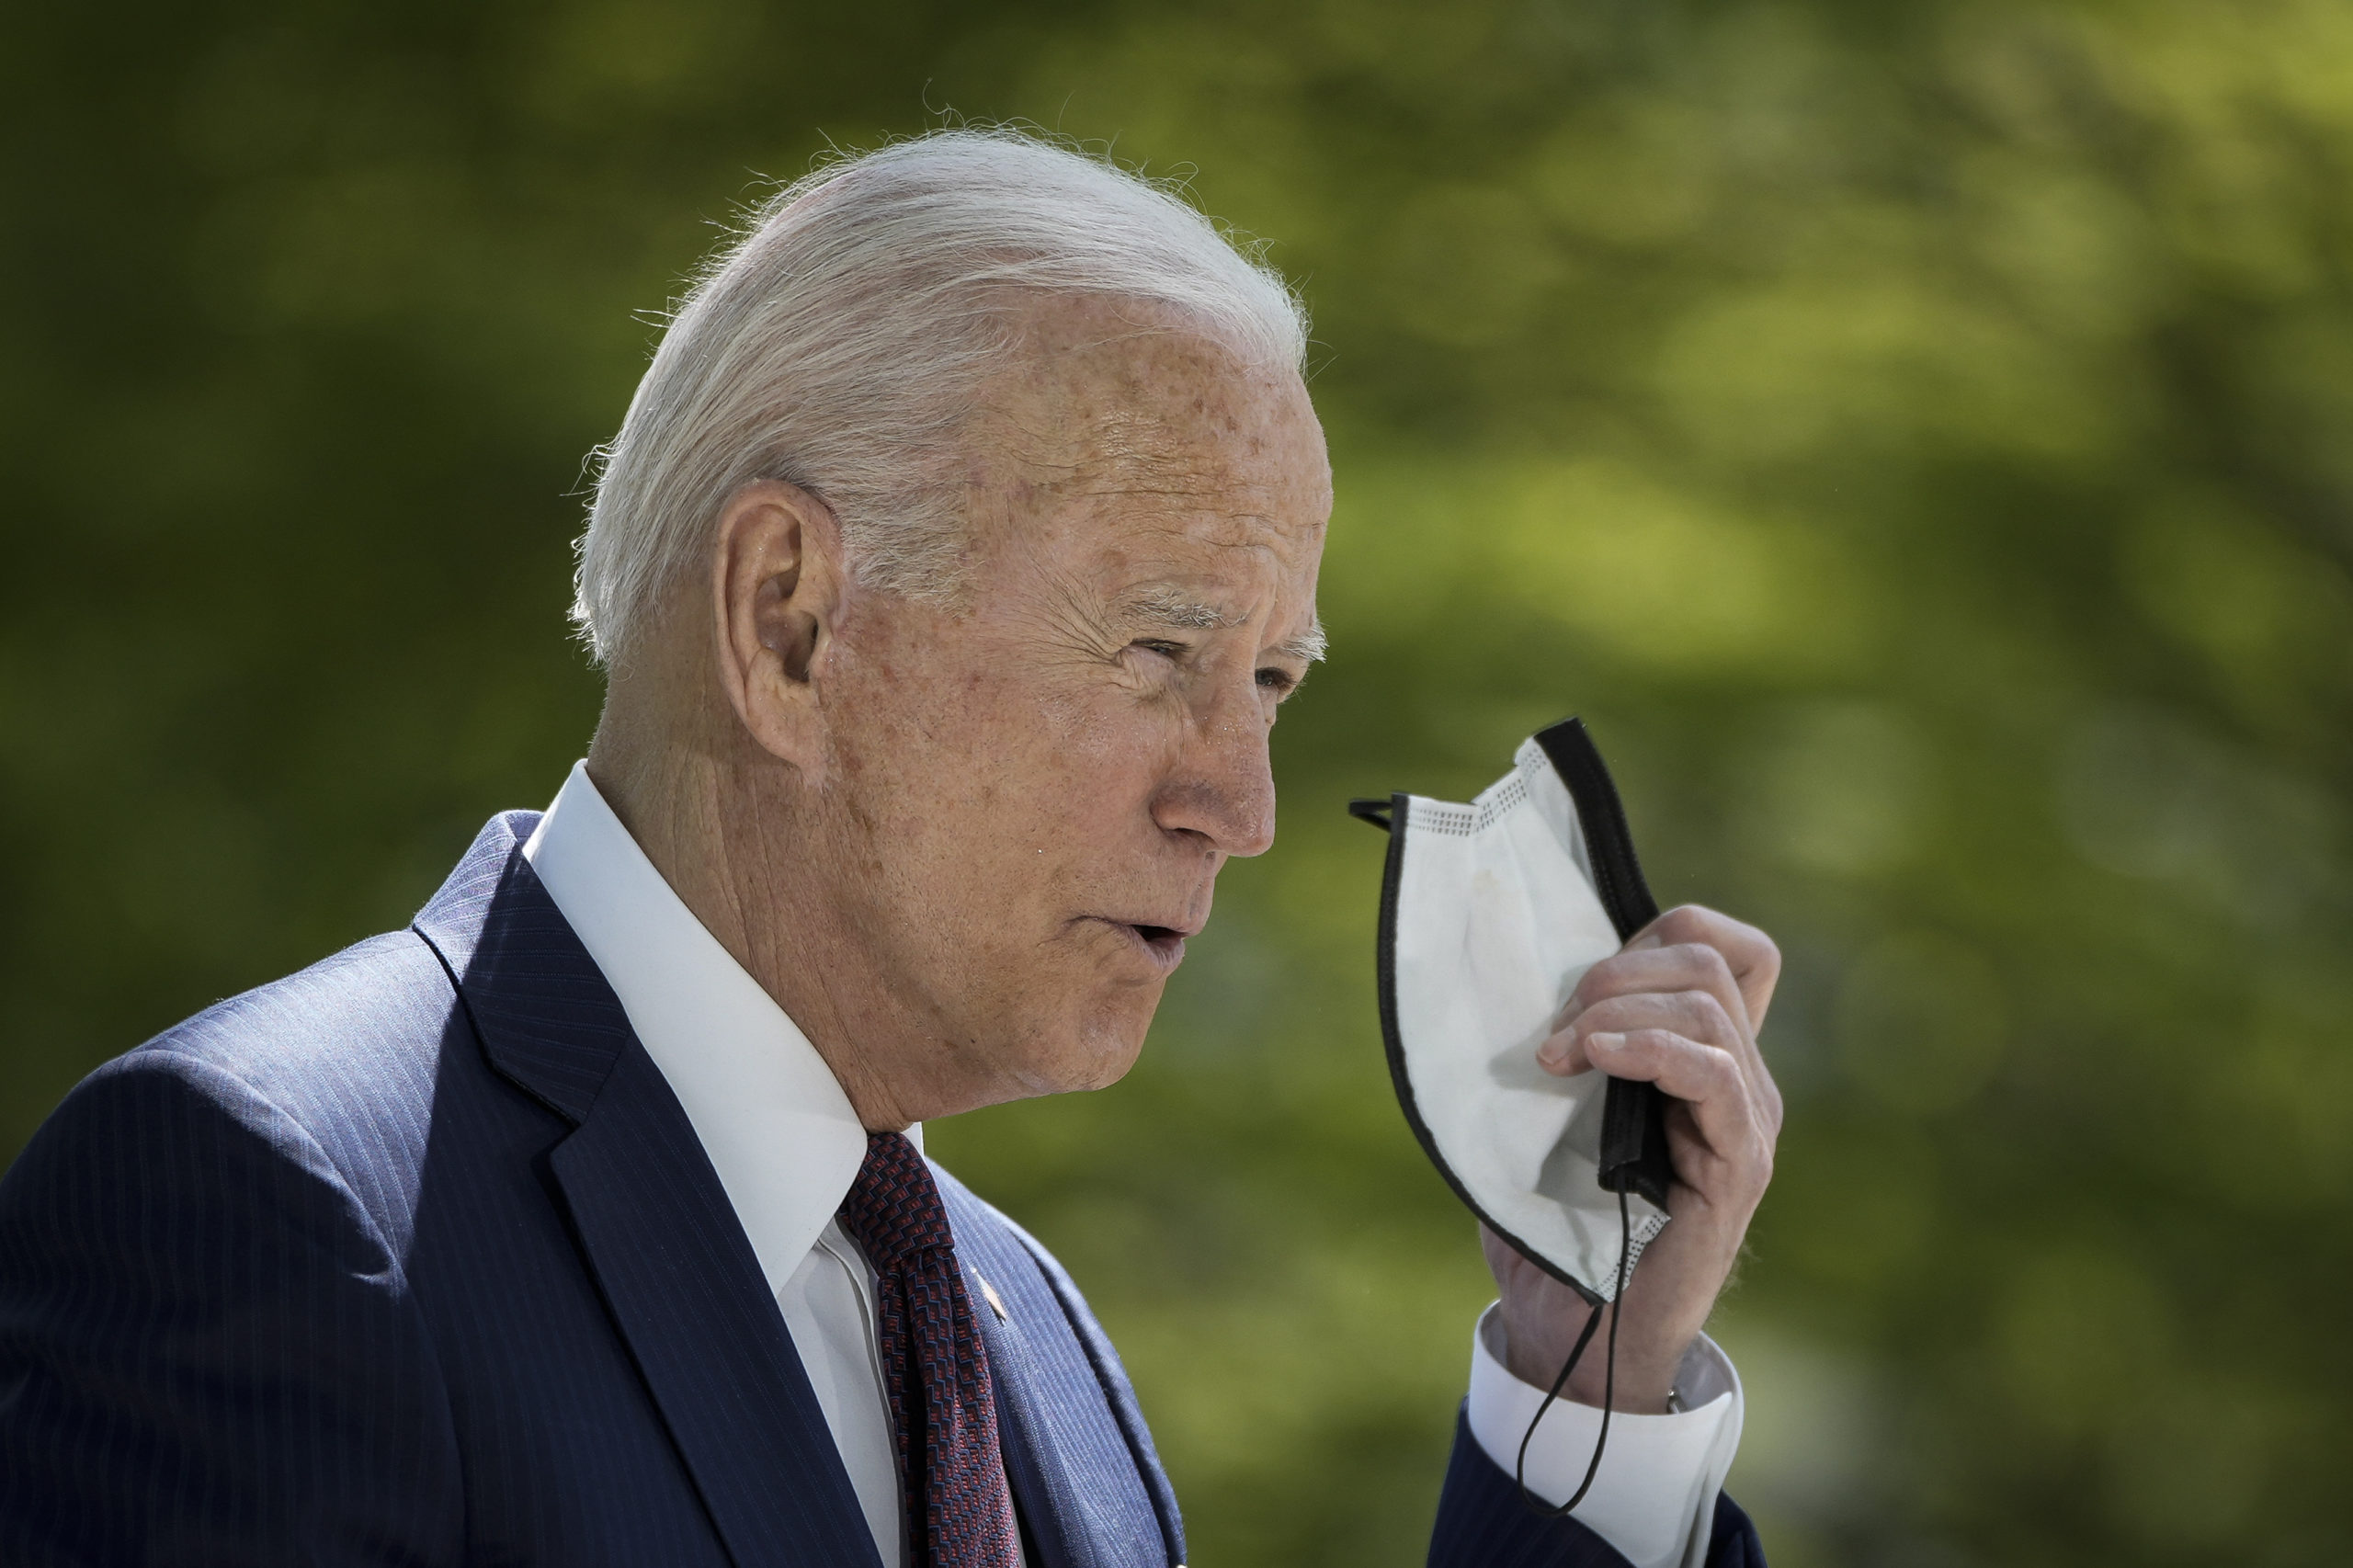 WASHINGTON, DC - APRIL 27: U.S. President Joe Biden removes his mask before speaking about updated CDC mask guidance on the North Lawn of the White House on April 27, 2021 in Washington, DC. President Biden announced updated CDC guidance, saying vaccinated Americans do not need to wear a mask outside when in small groups. (Photo by Drew Angerer/Getty Images)